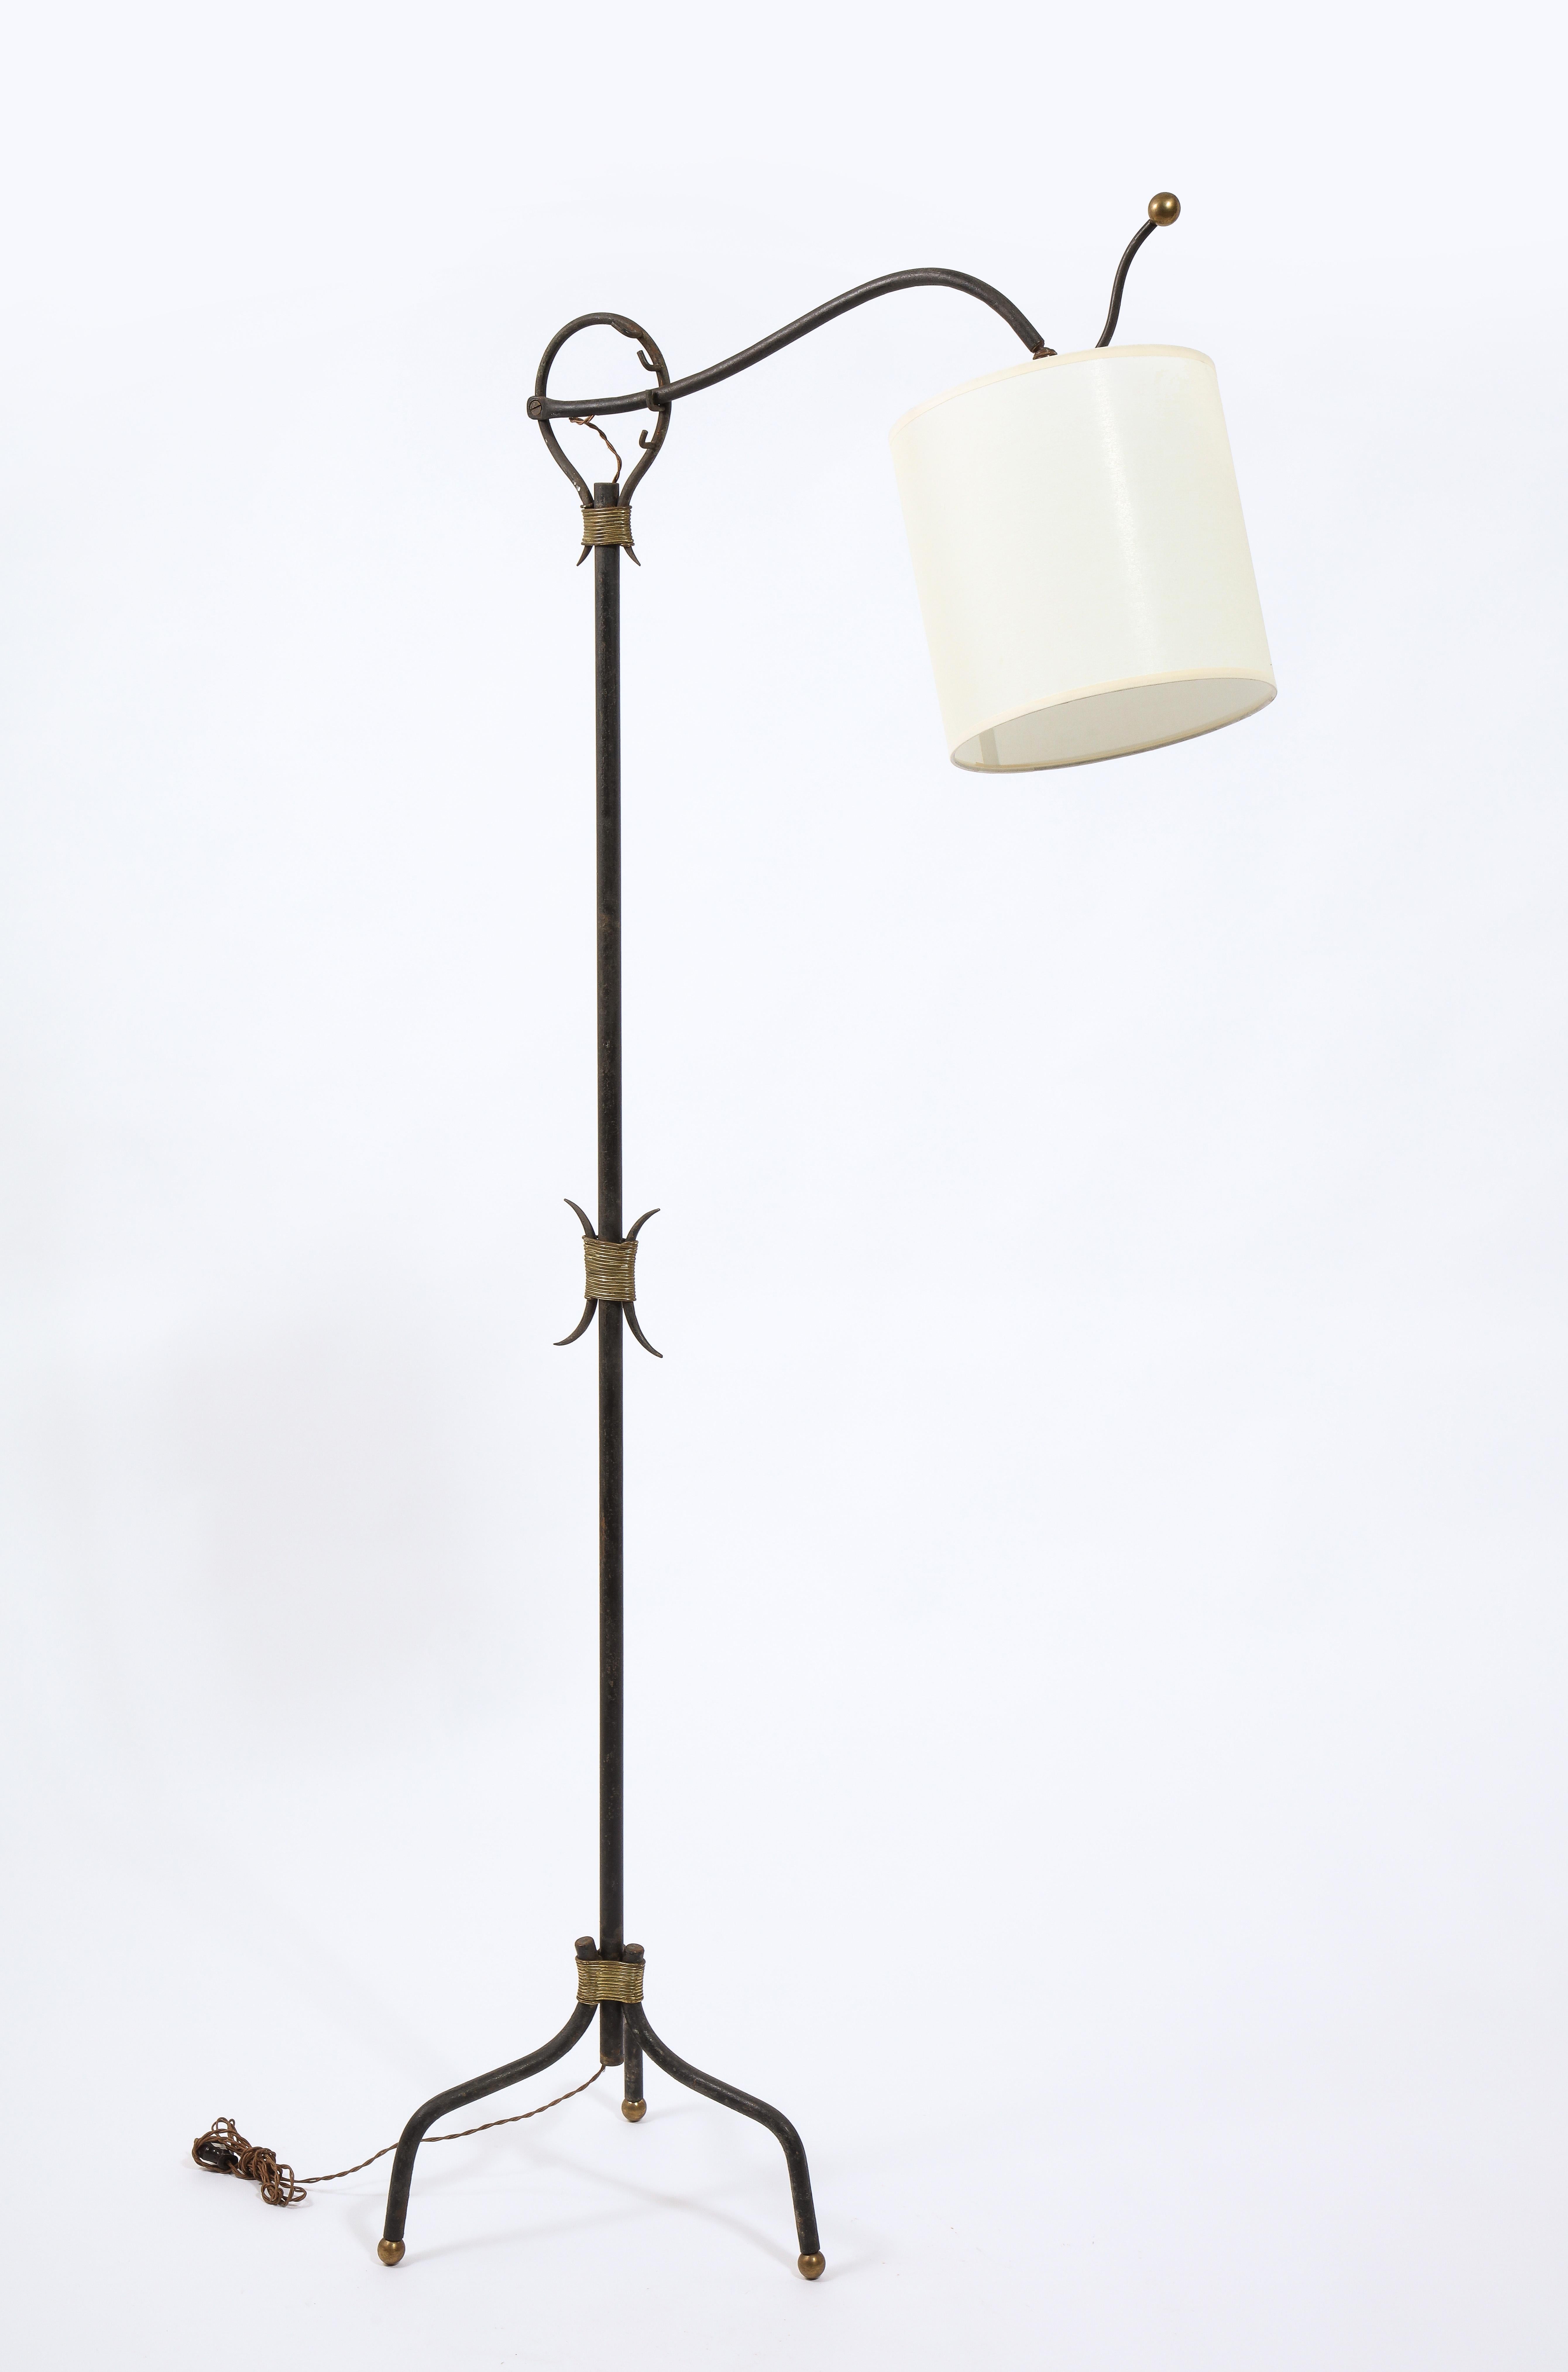 Adjustable Tripodal Cantilevered Wrought Iron & Brass Floor Lamp, France 1950's For Sale 4